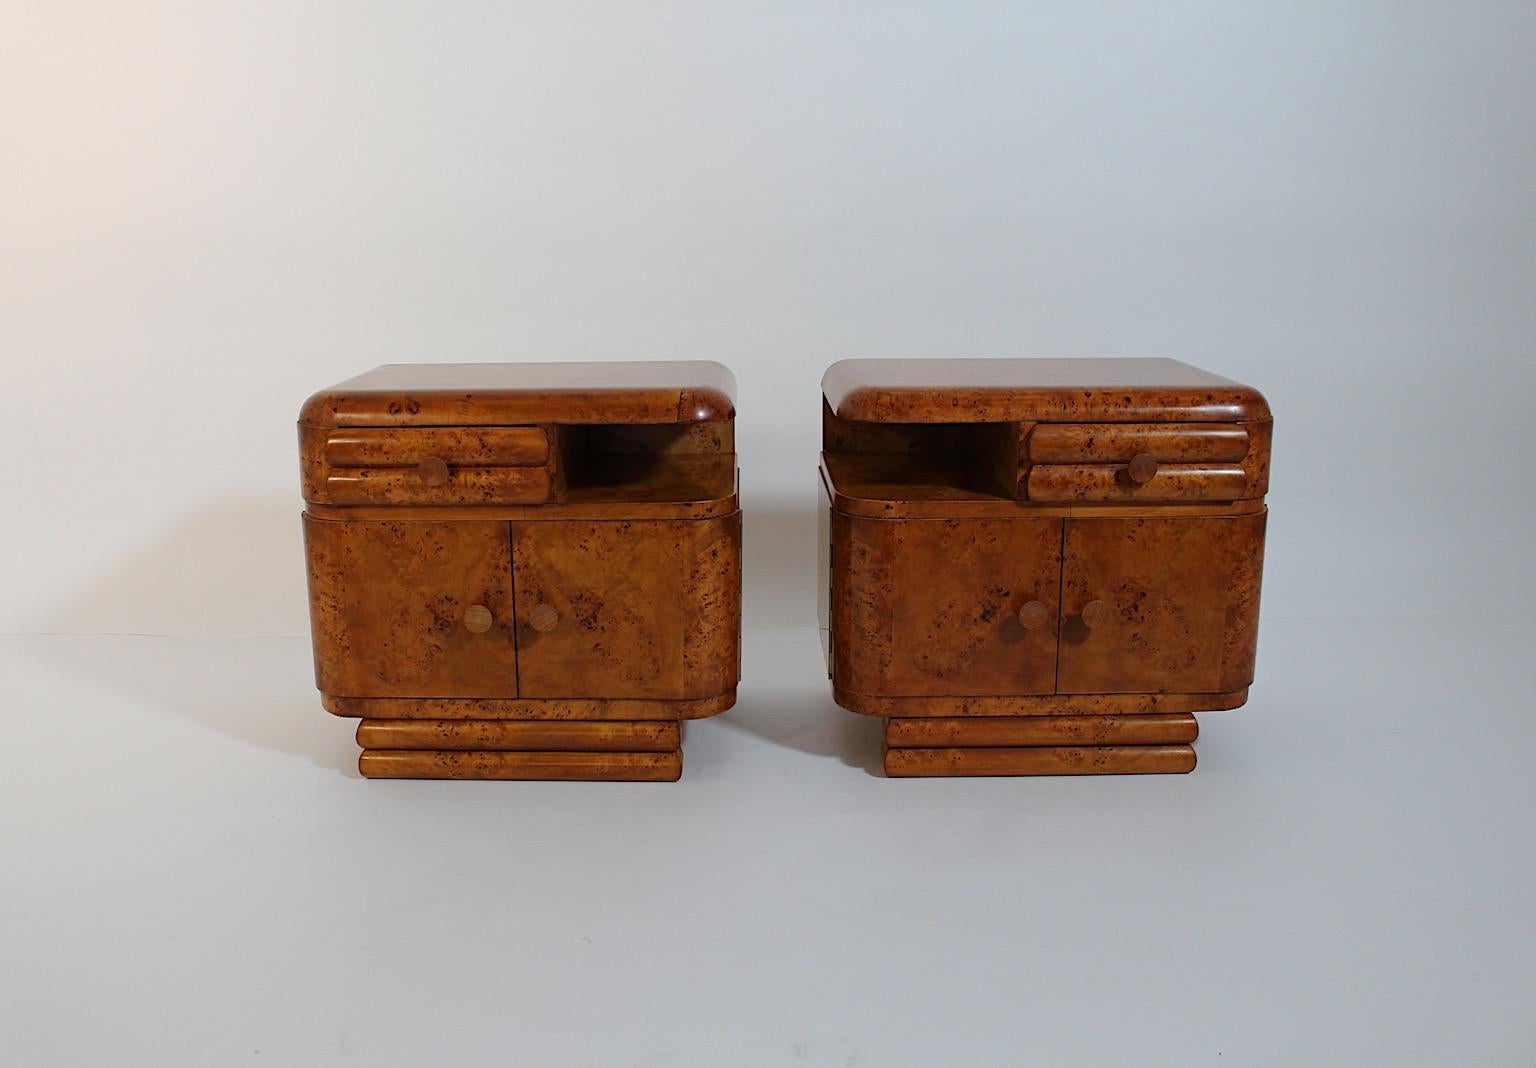 Art Deco vintage pair of nightstands or small chests from poplar 1930s Vienna.
A sophisticated pair of nightstands or small chests, each with 2 doors and 1 drawer, with a beautiful grain and a shellac polished surface by hand.
Through the shellac